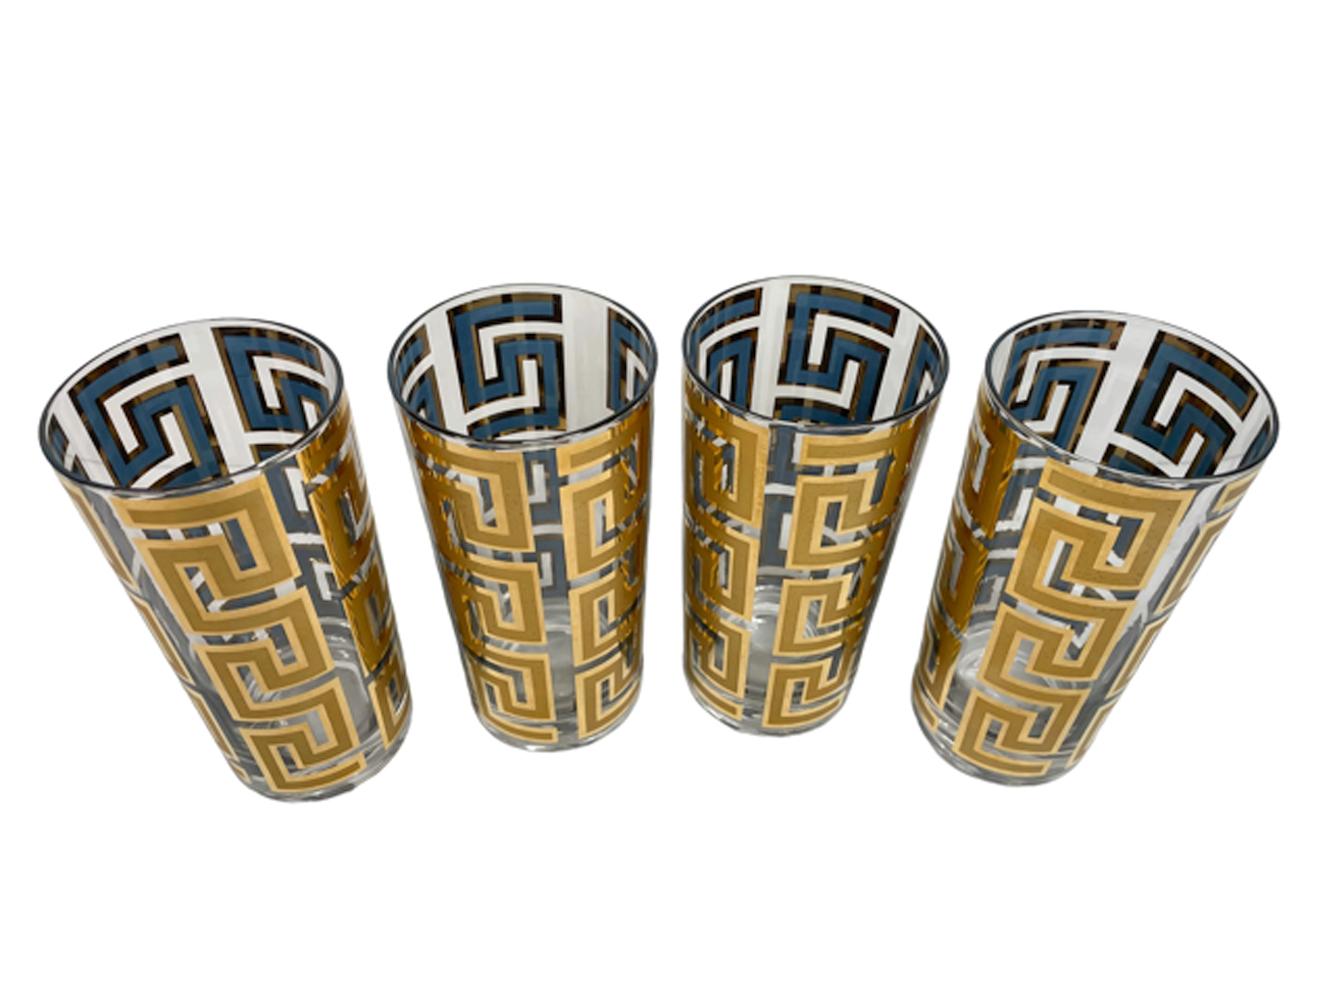 Eight Culver, LTD. highball glasses with vertical Greek Key bands of 22k gold over blue enamel. The gold with satin finish within gloss on the exterior with the blue visible only on the interior with gold border.